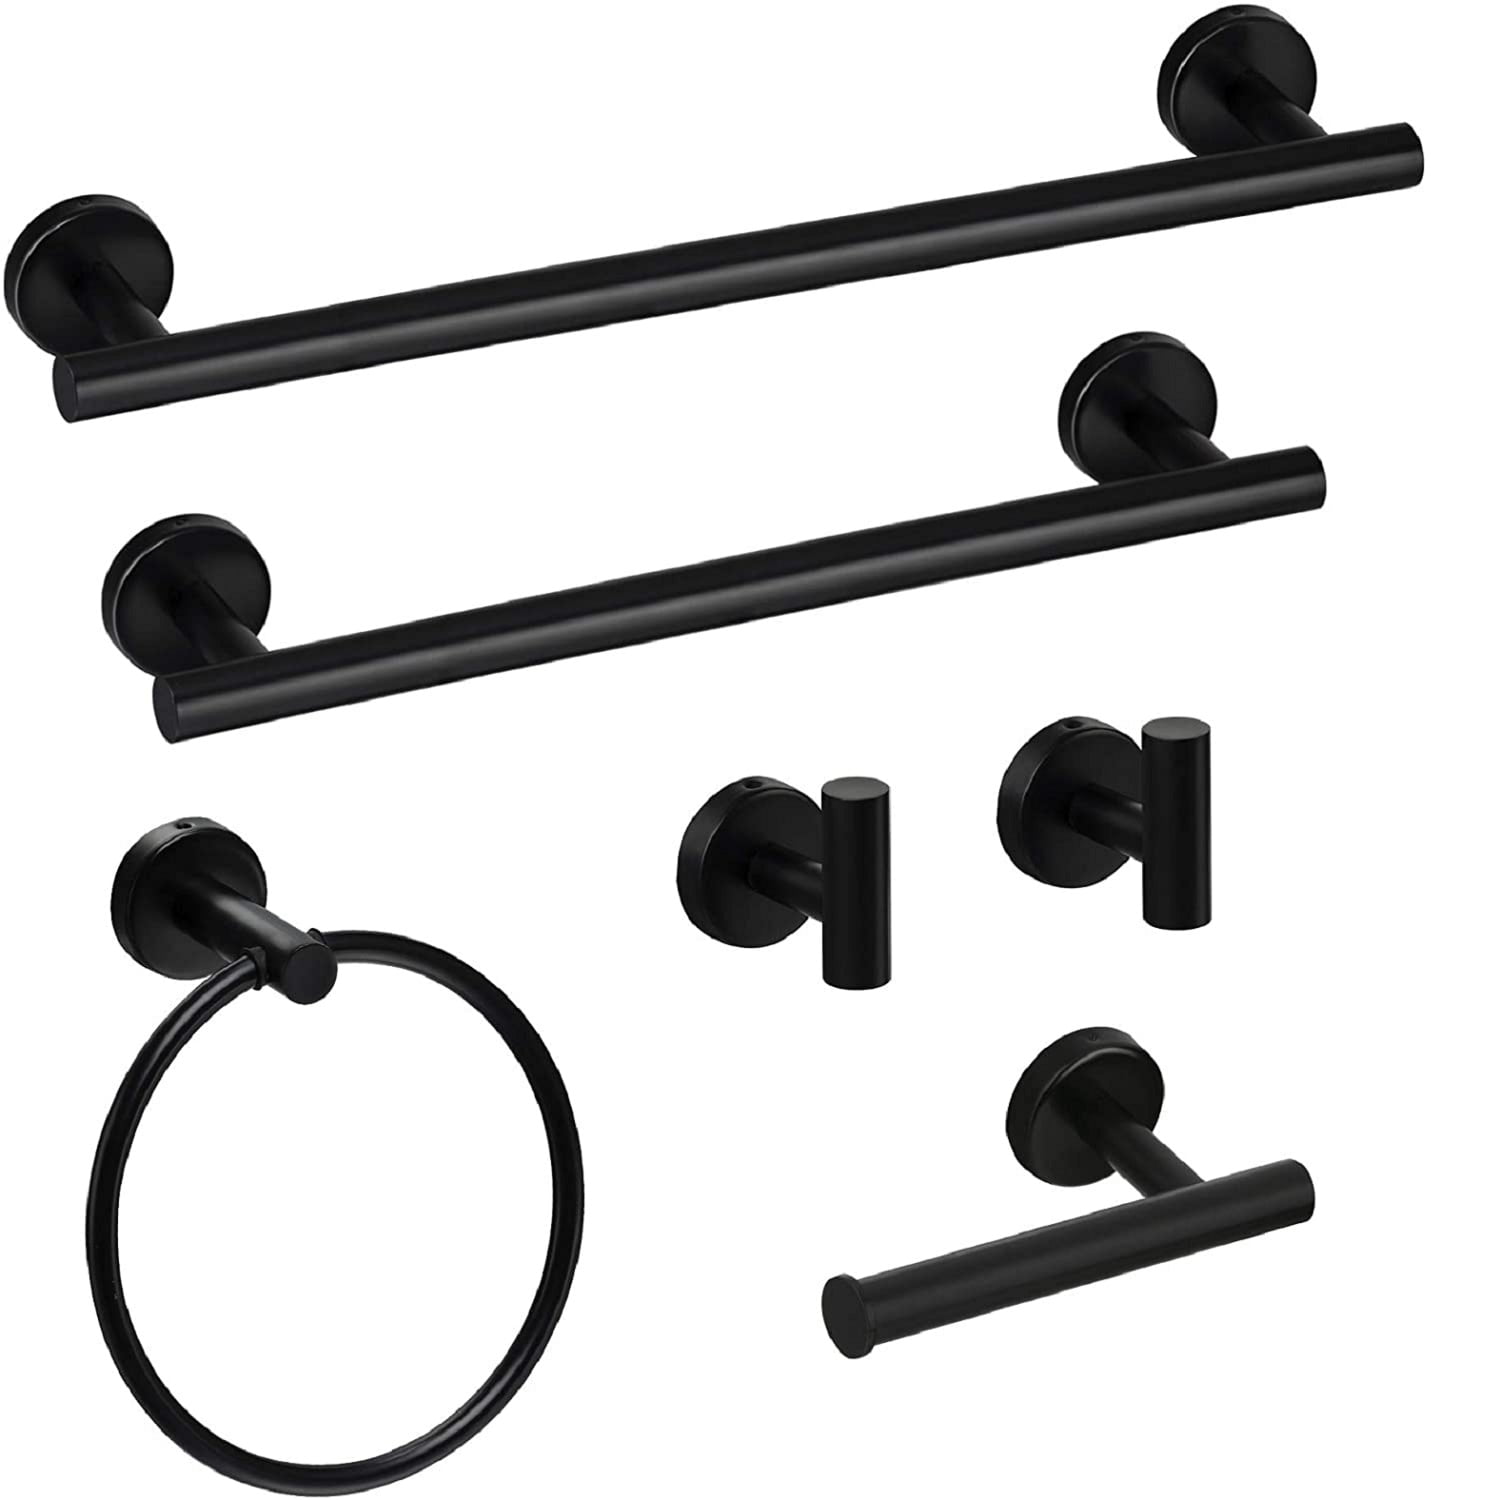 Details about   304 Stainless Steel Towel Ring Towel Holder Wall Mounted Brushed Black Durable 